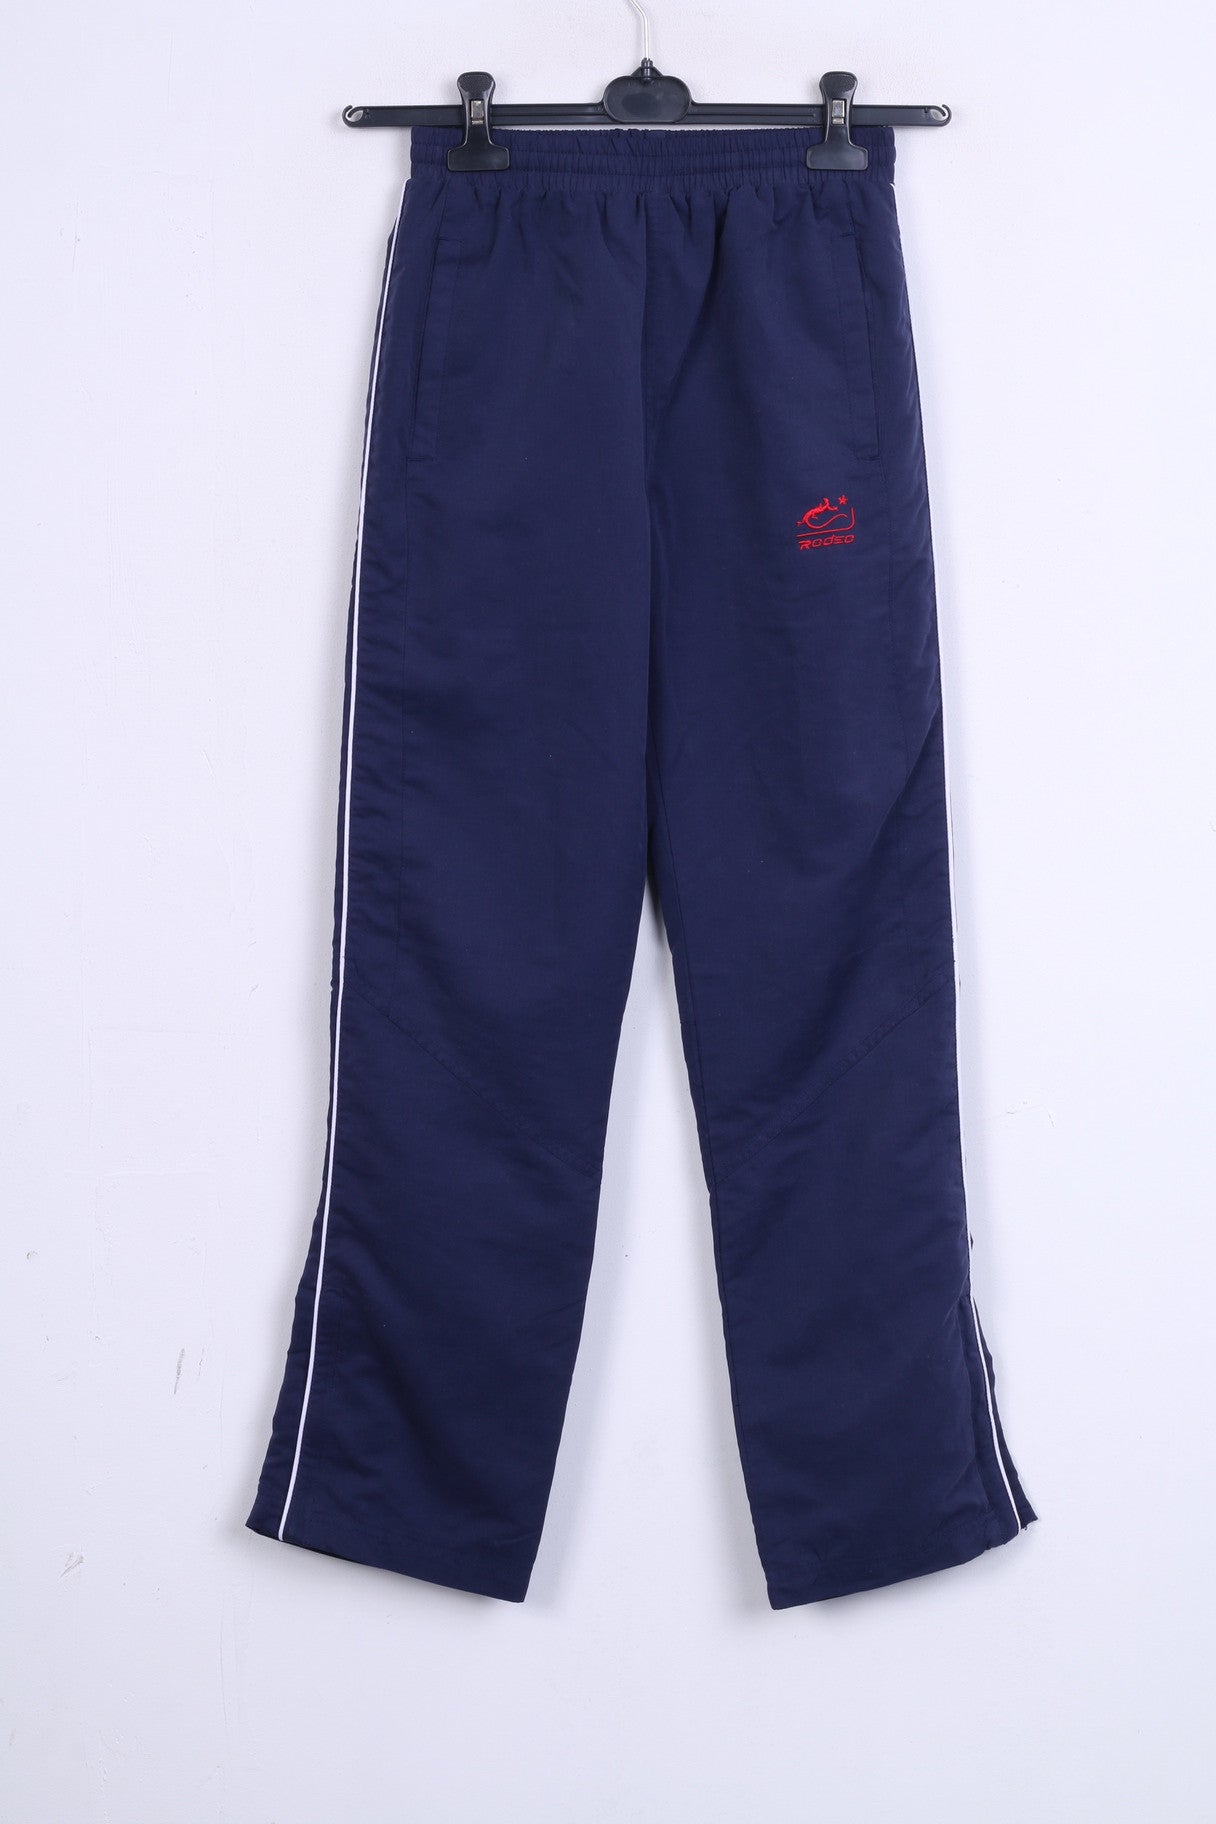 Rodeo Sports at C&A Boys 146/152 Sweatpants Navy Tracksuit Bottom Sport